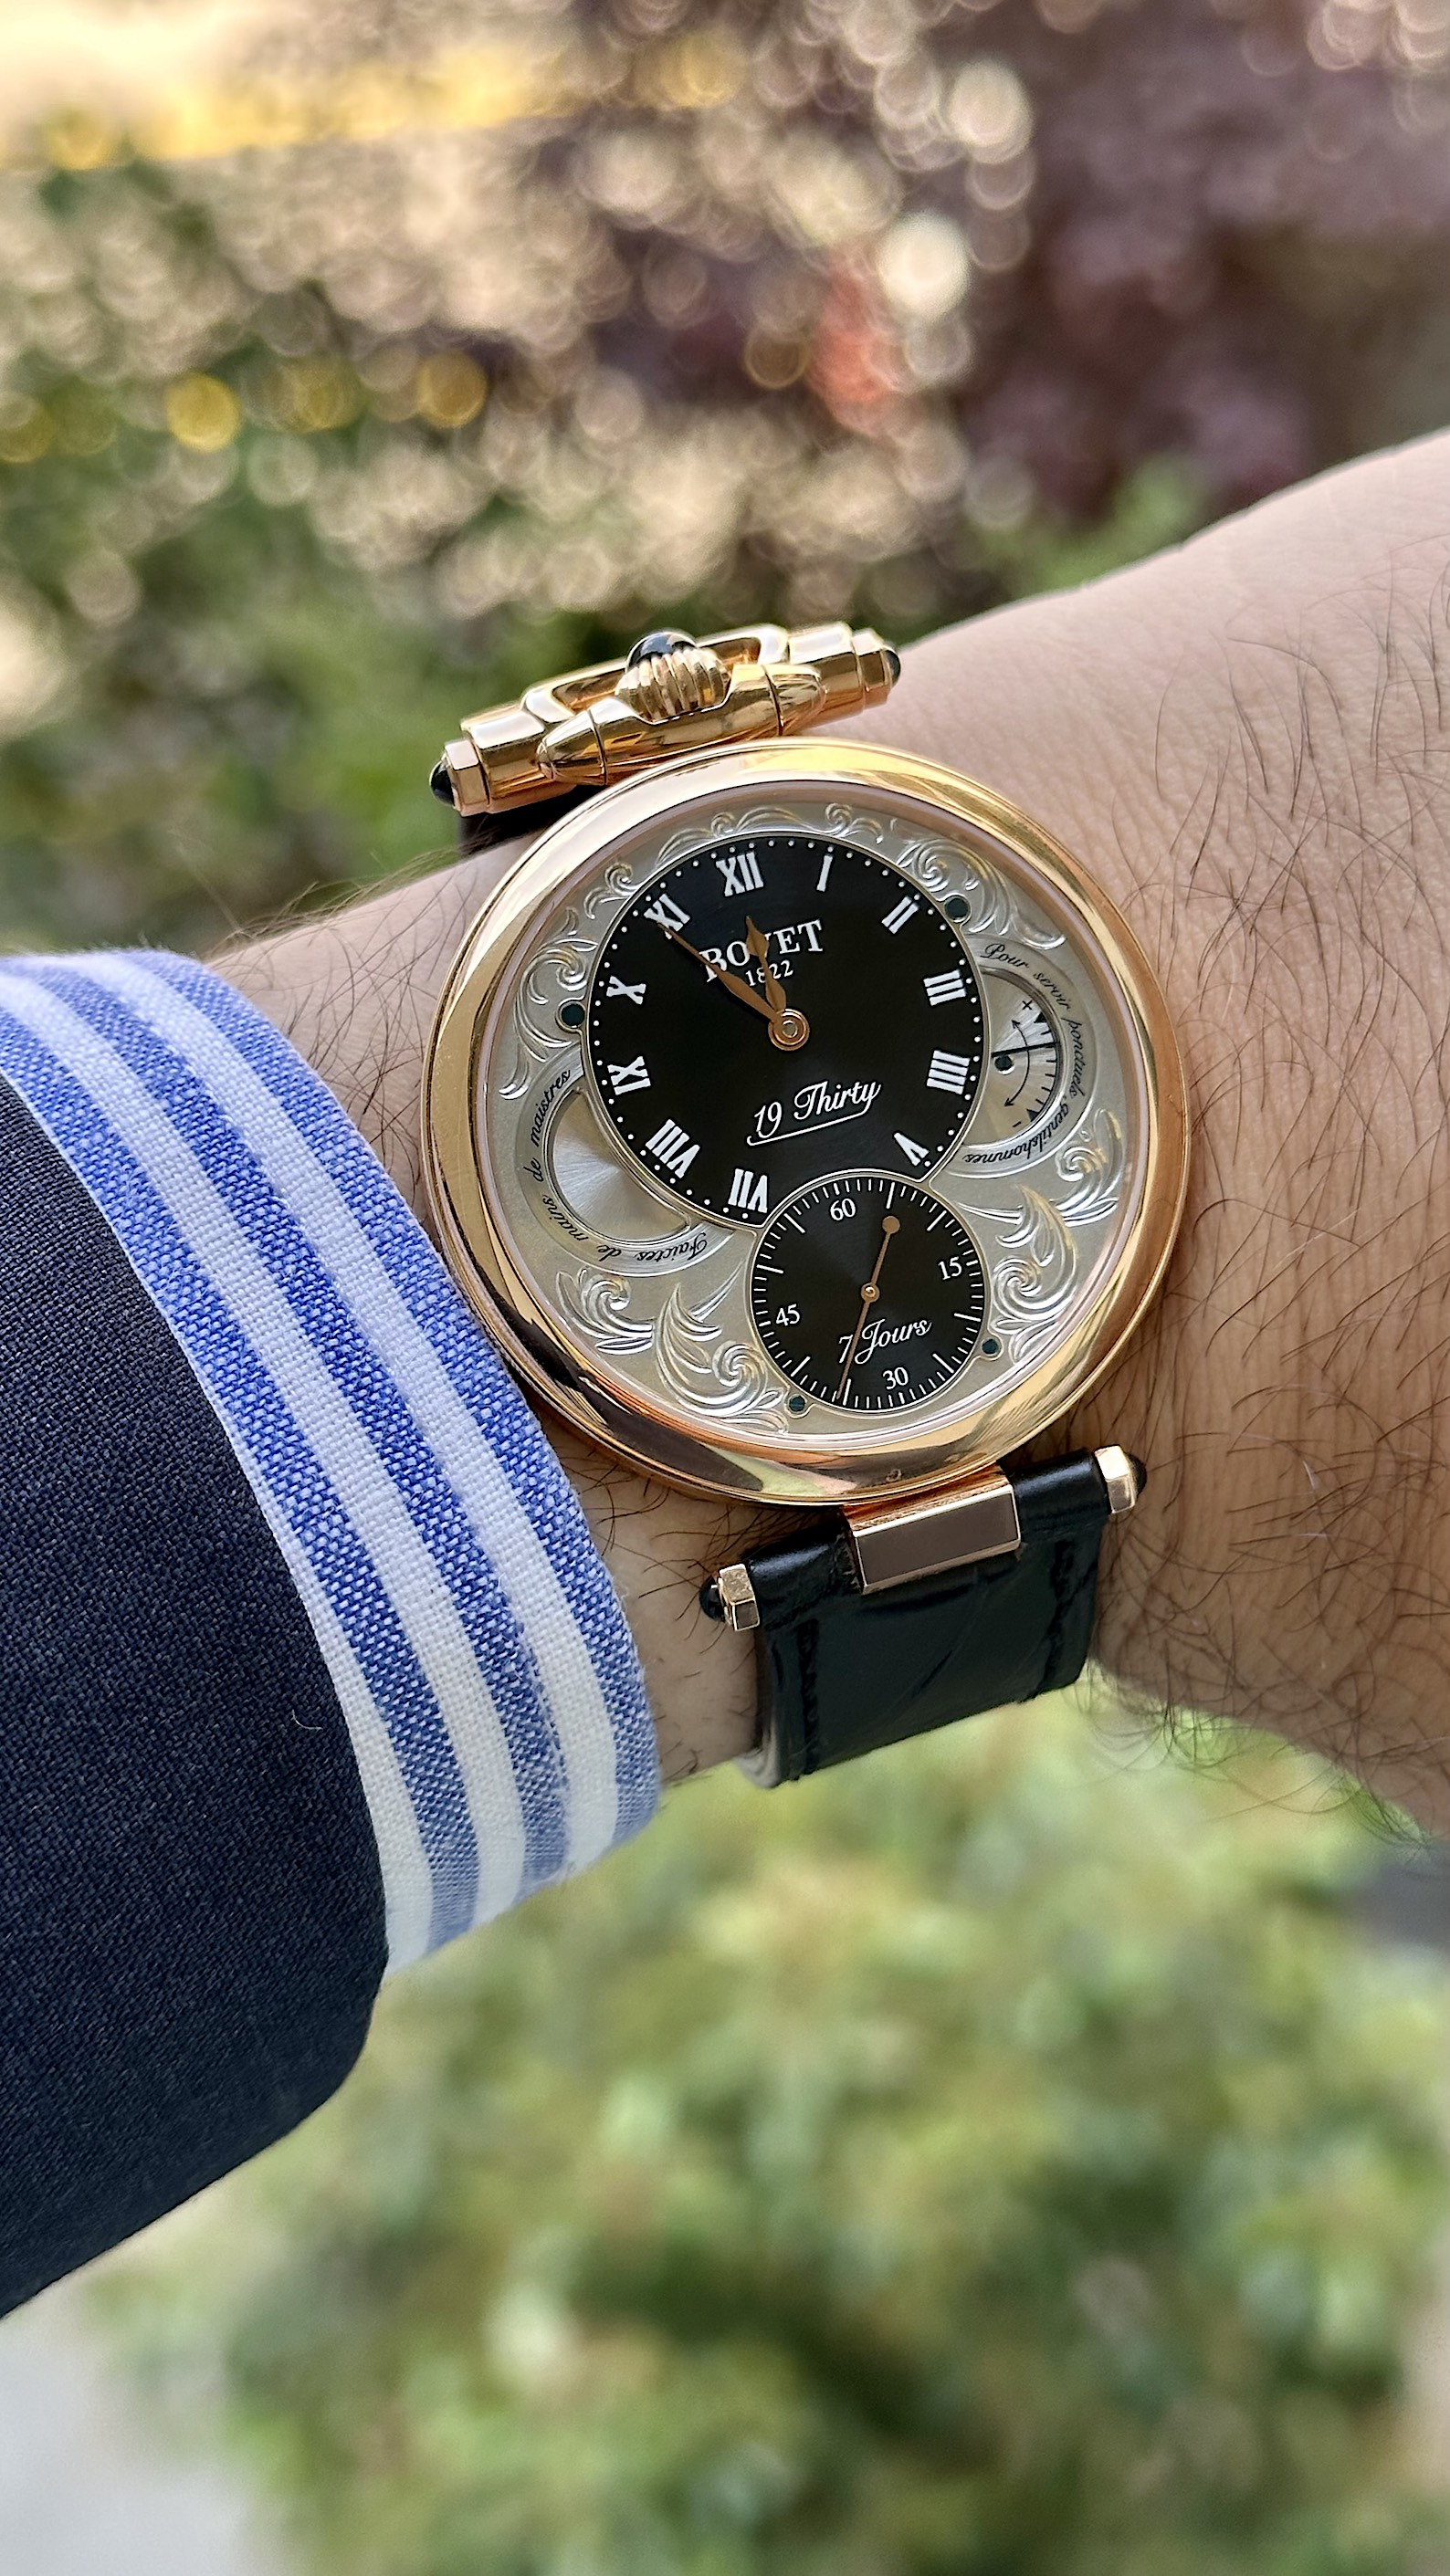 Bovet Fleurier 19Thirty - Front View